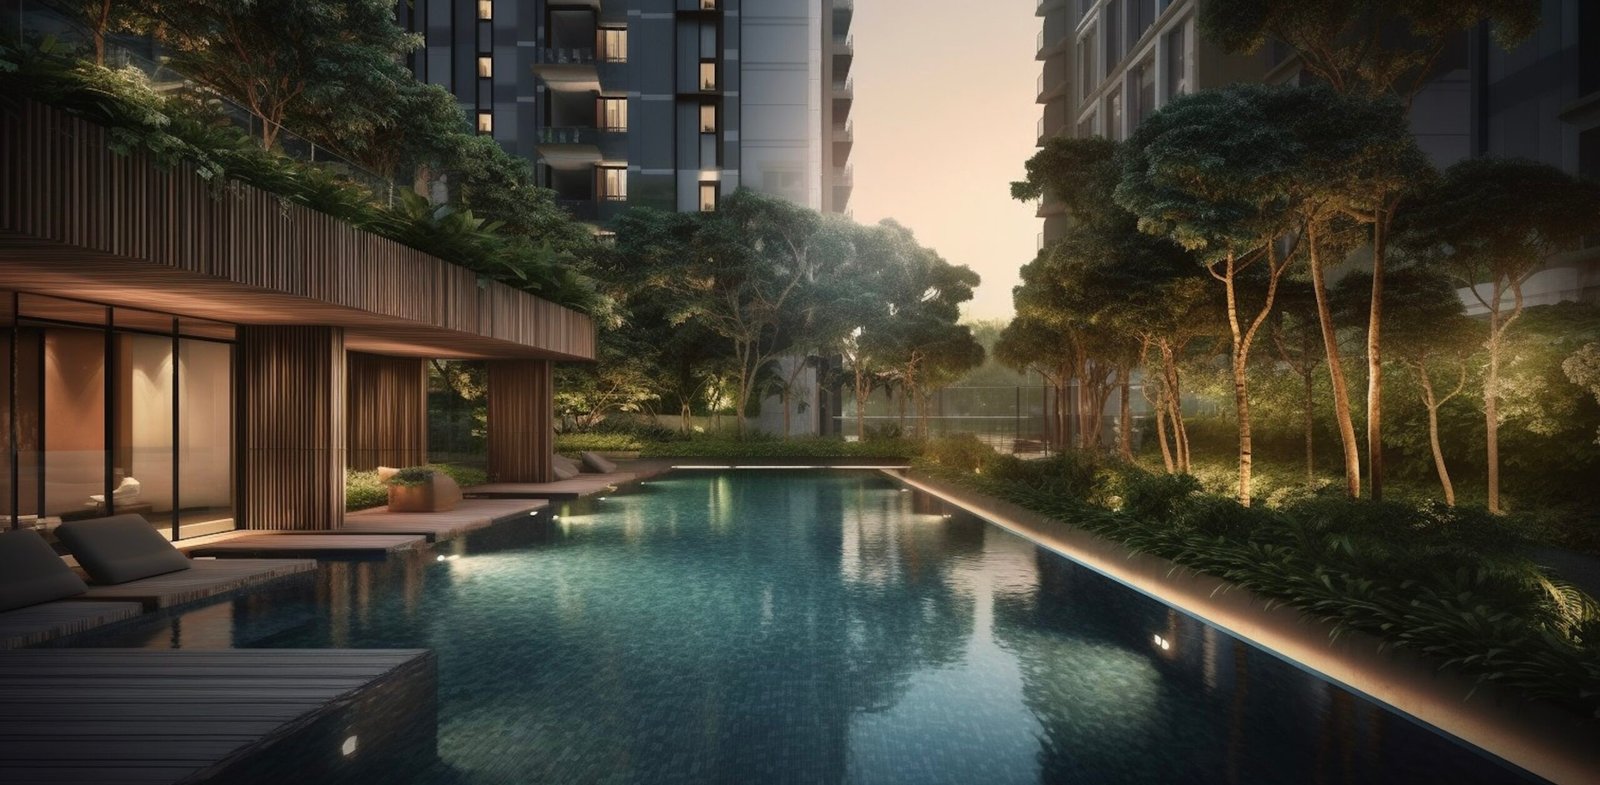 Efficient Connections, Smart Technologies and Sustainability: URA's Master Plan Transforms Upper Thomson Road Condo into an Attractive and Harmonious Place to Live